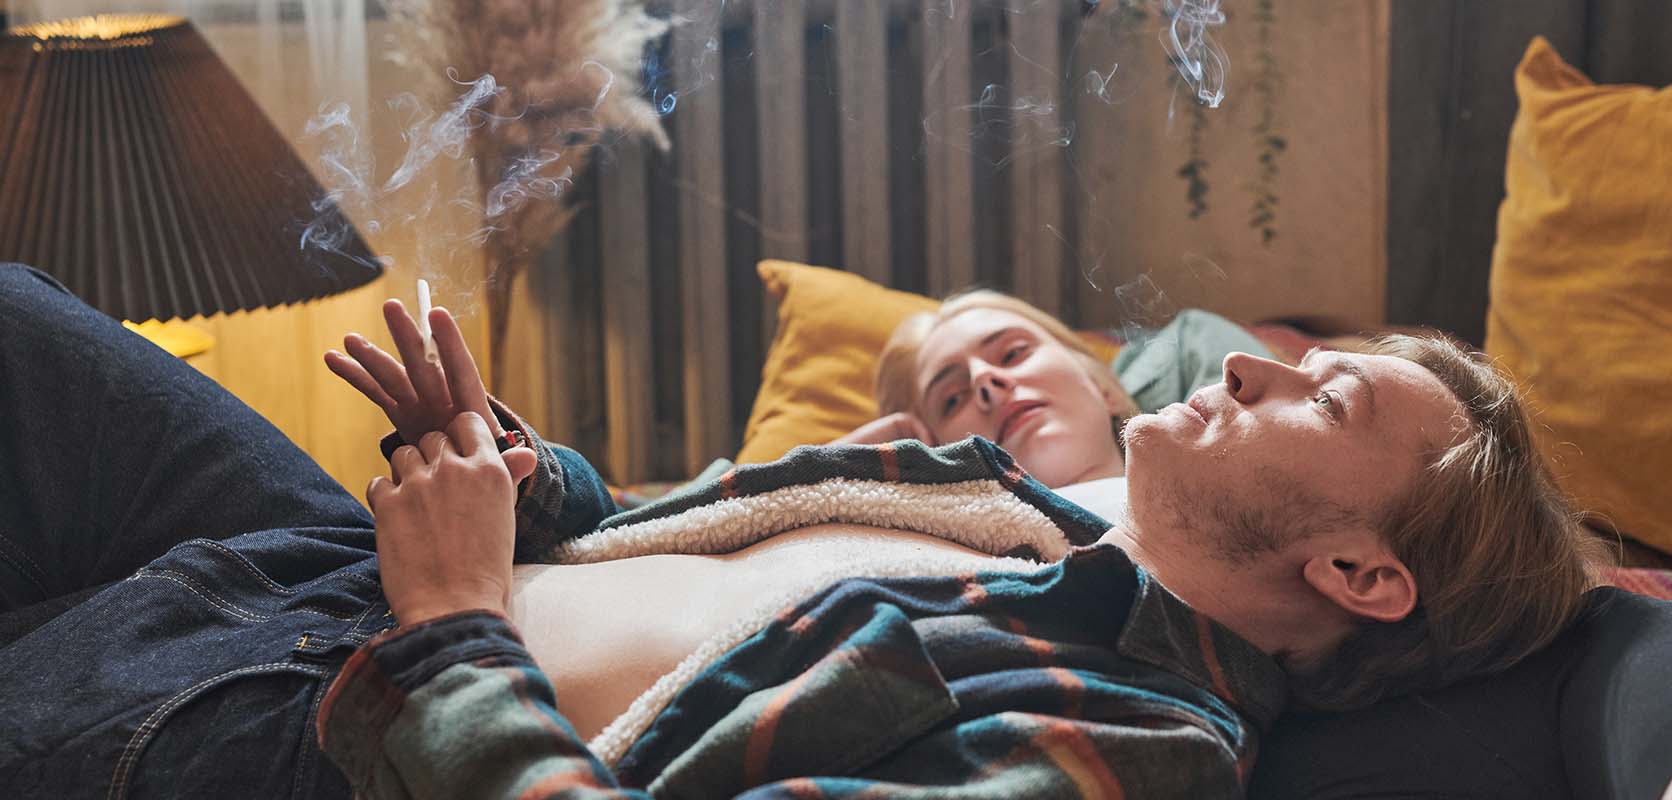 couple relaxing and smoking marijuana at home. order weed online. west coast cannabis online dispensary canada.